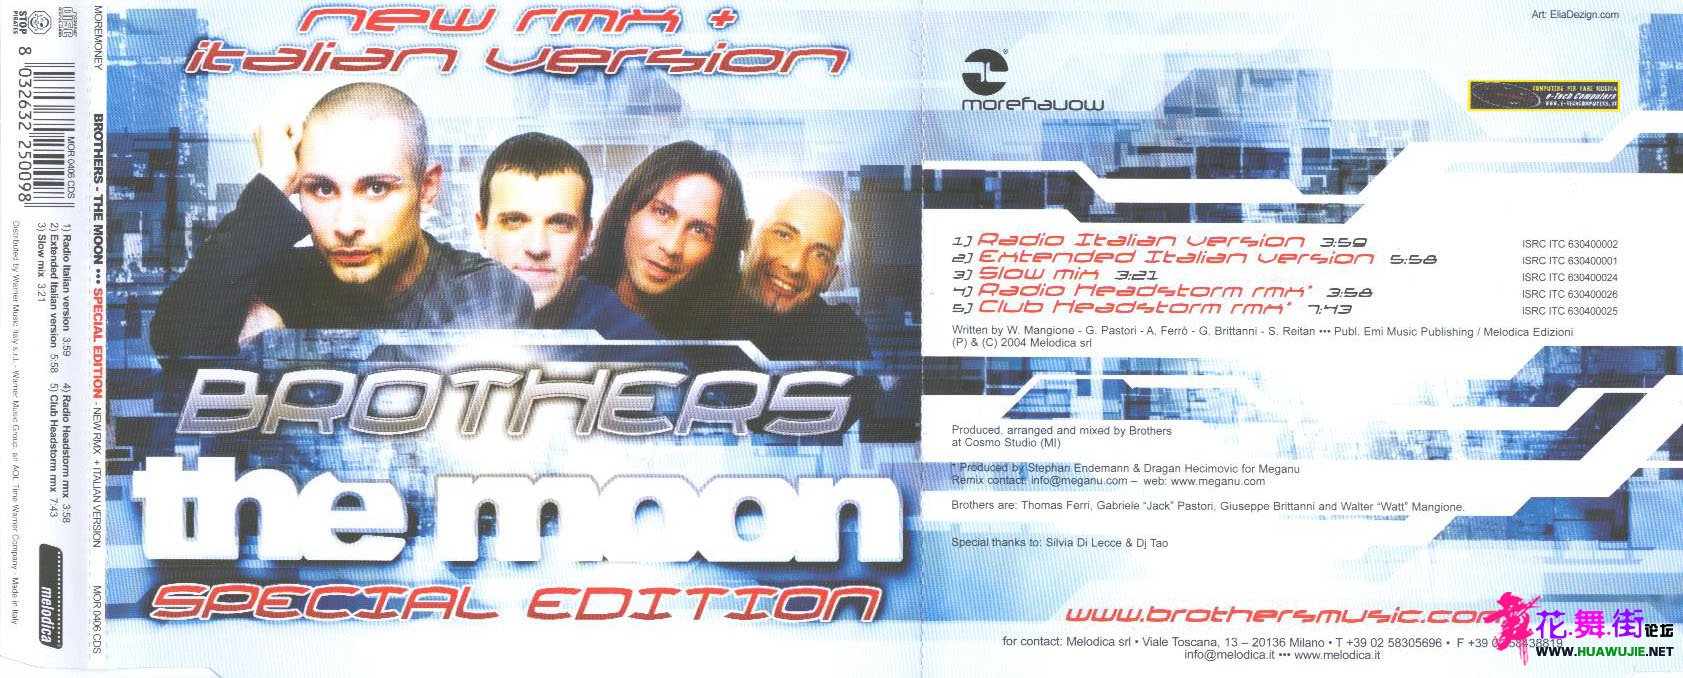 00-brothers-the_moon_(new_rmx_and_italian_version)-limited_edition-cdm-2004-bwa-cover.jpg